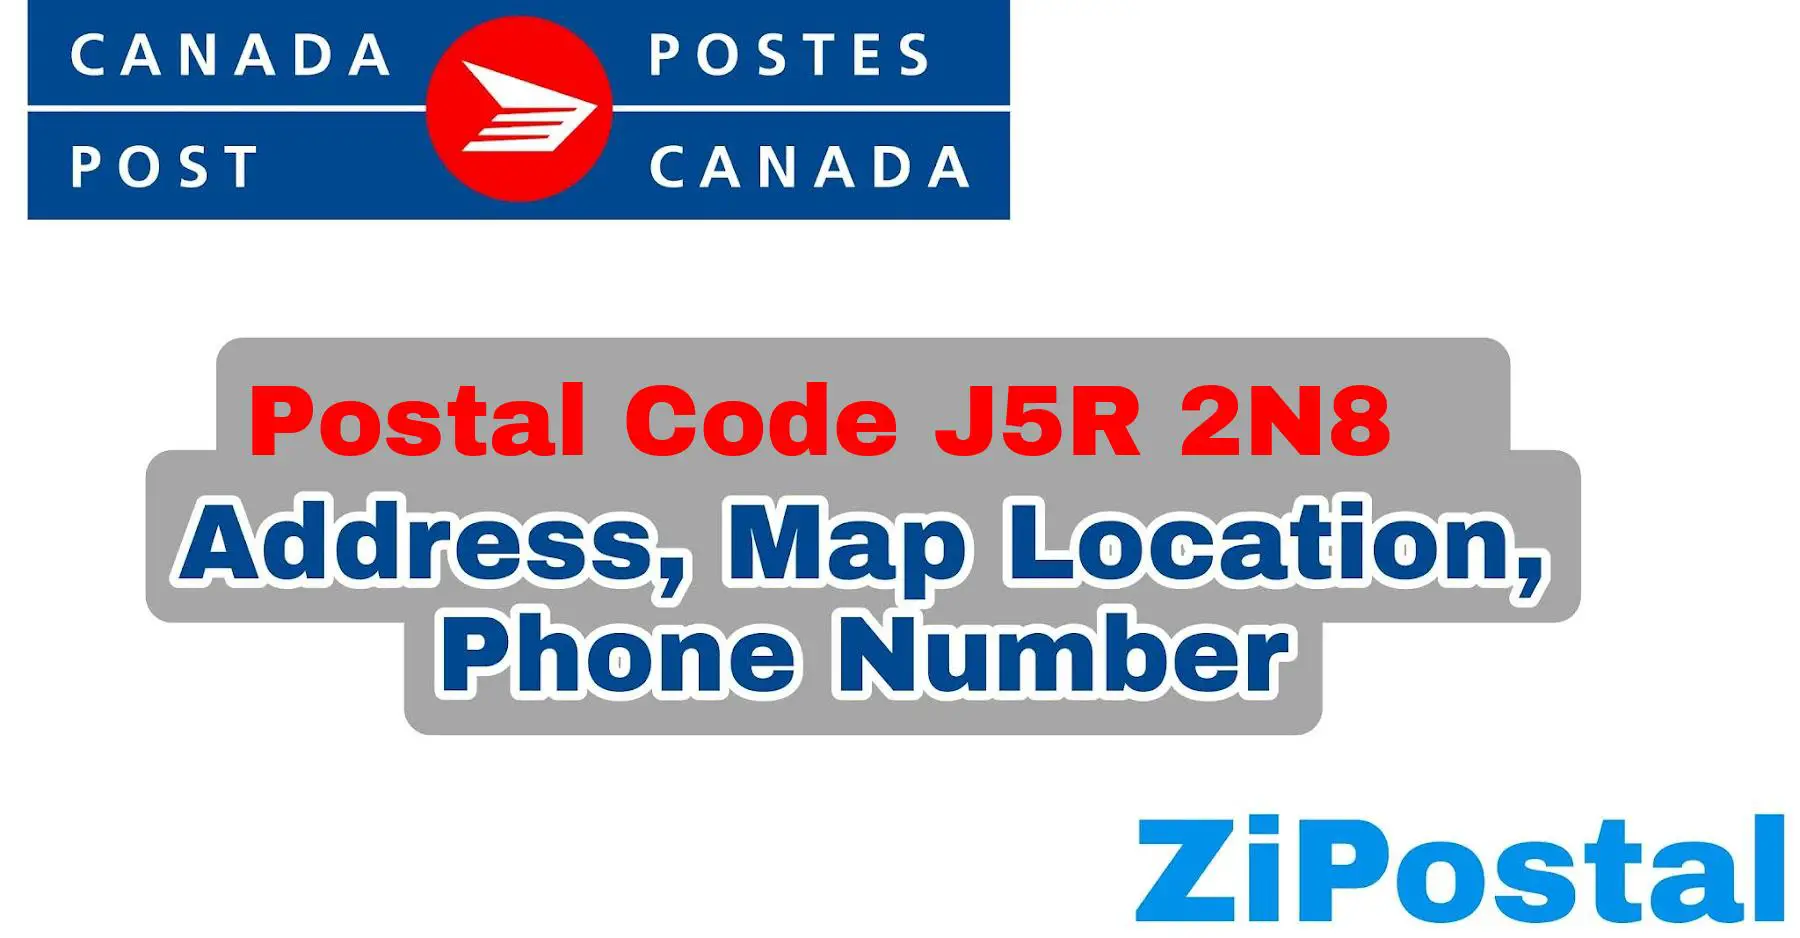 Postal Code J5R 2N8 Address Map Location and Phone Number